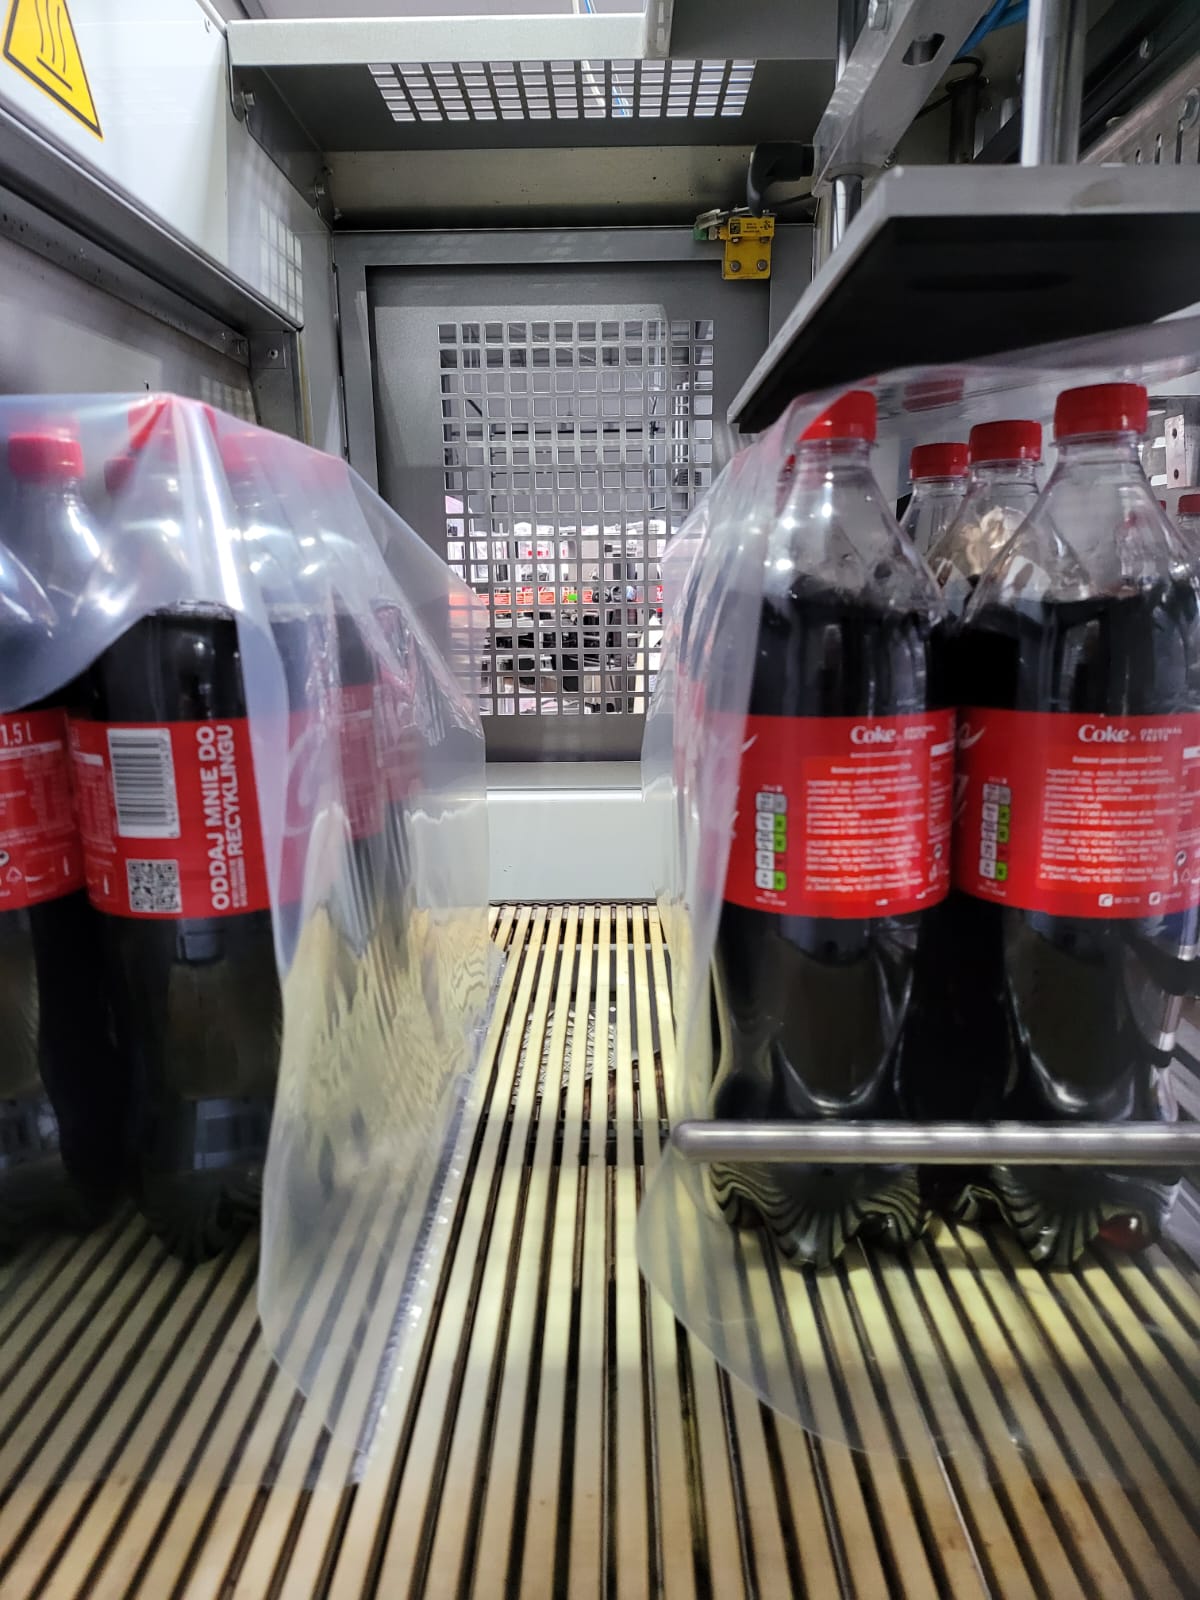 1.5L bottles Polish Coca Cola during machine pacing into 6 pack